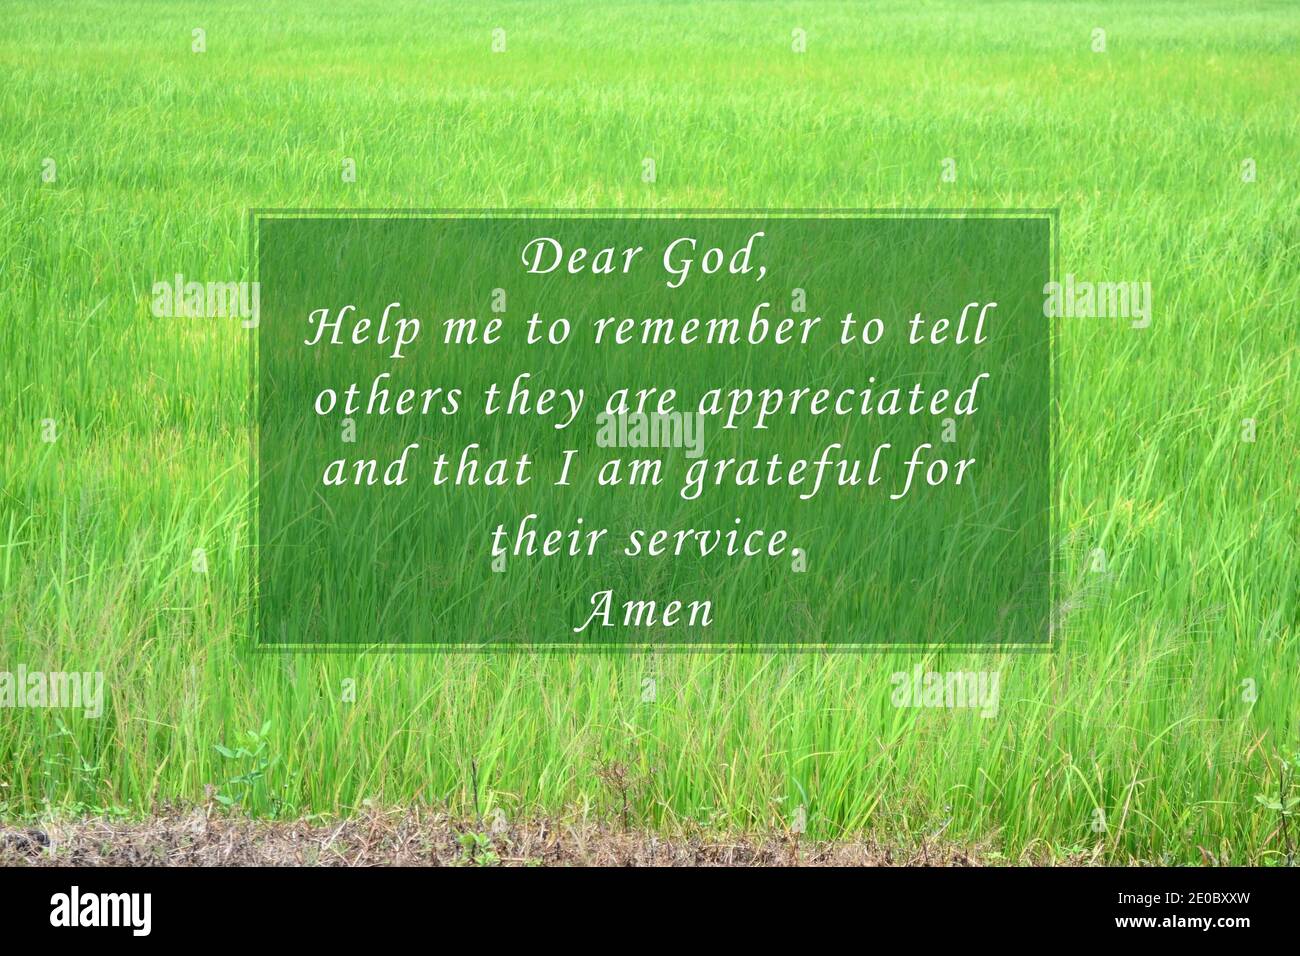 Prayer quote with blurred paddy field image. Dear God, help me to ...